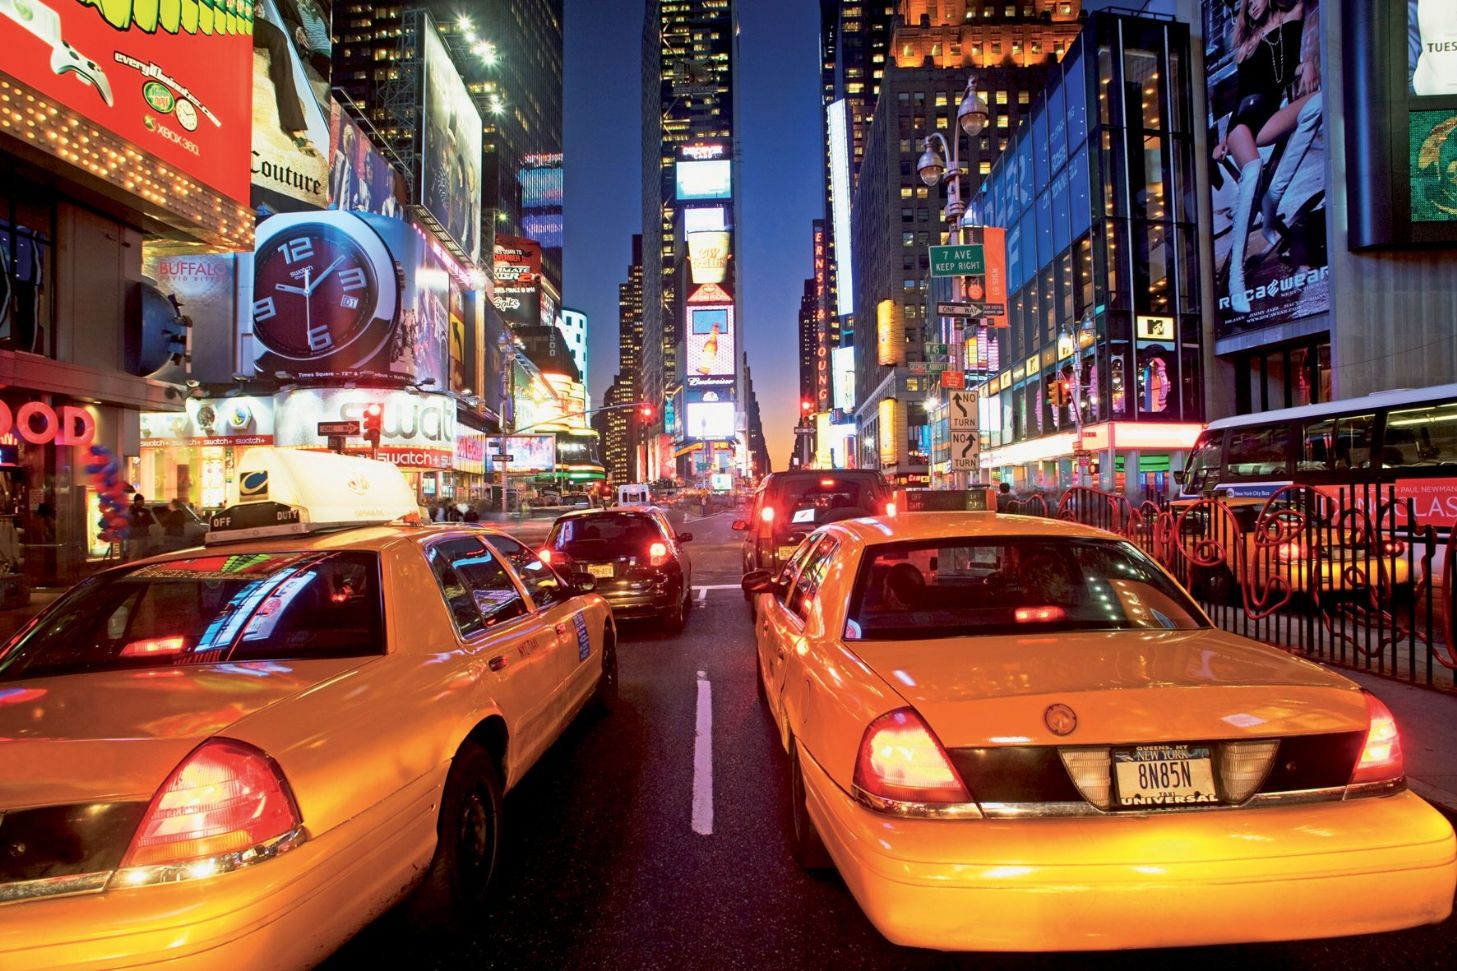 Giant Wallpaper Wall Mural New York Times Square Yellow Taxi Themed